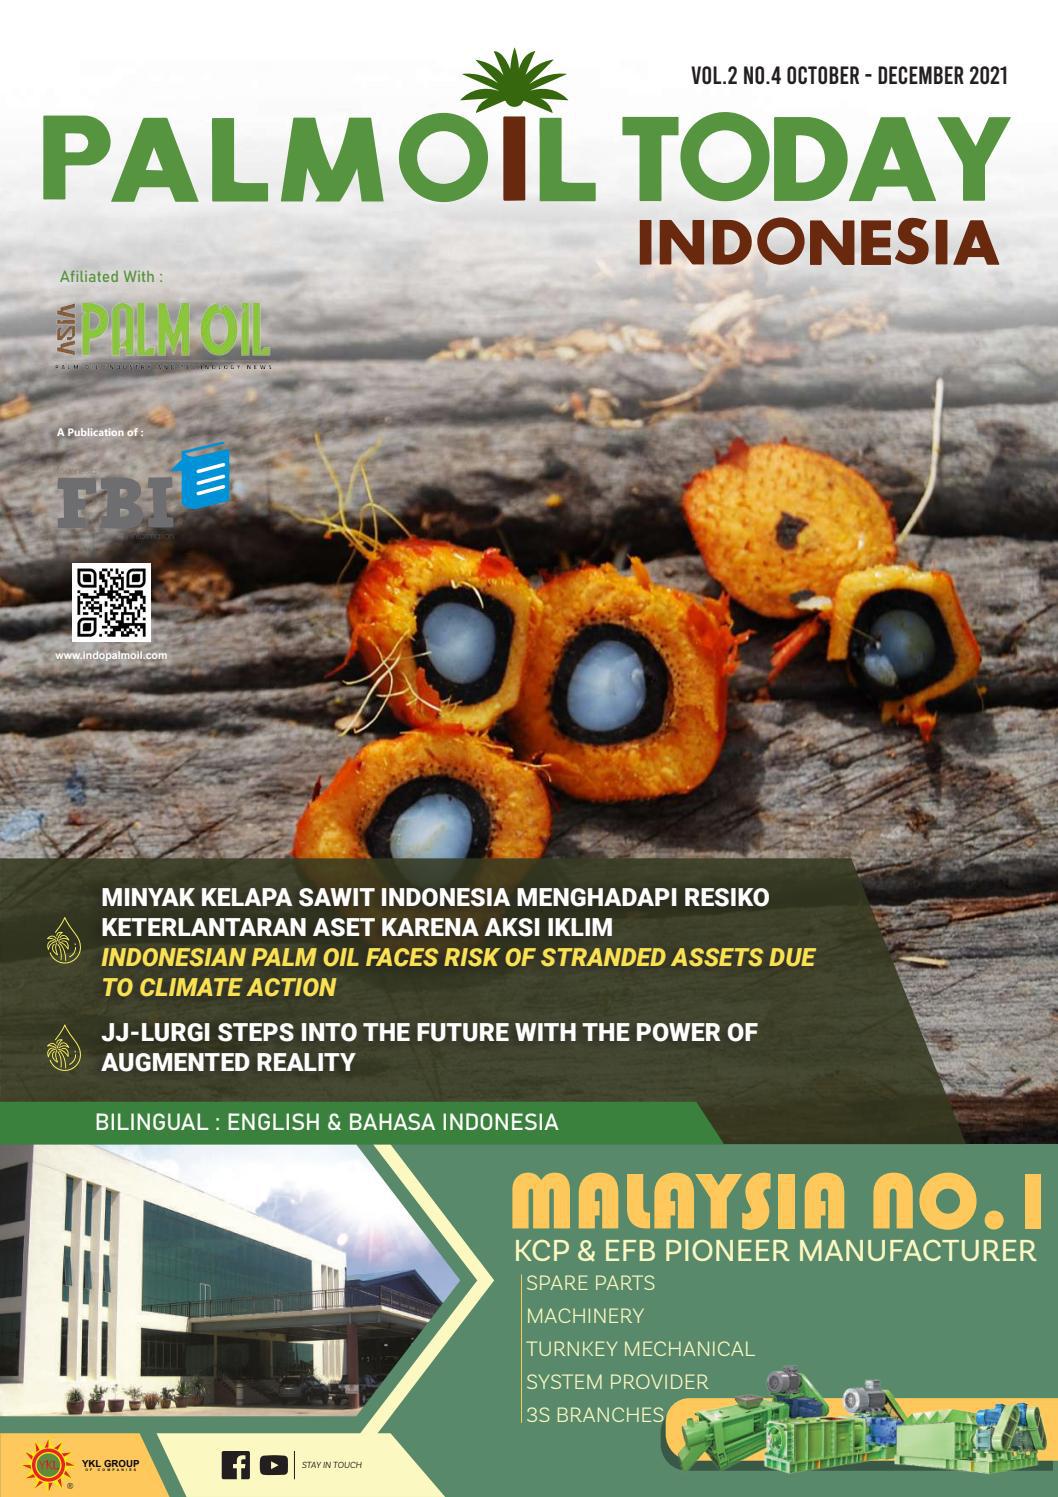 Palm Oil Today Indonesia Magazine Vol.2 4 - October - December 2021